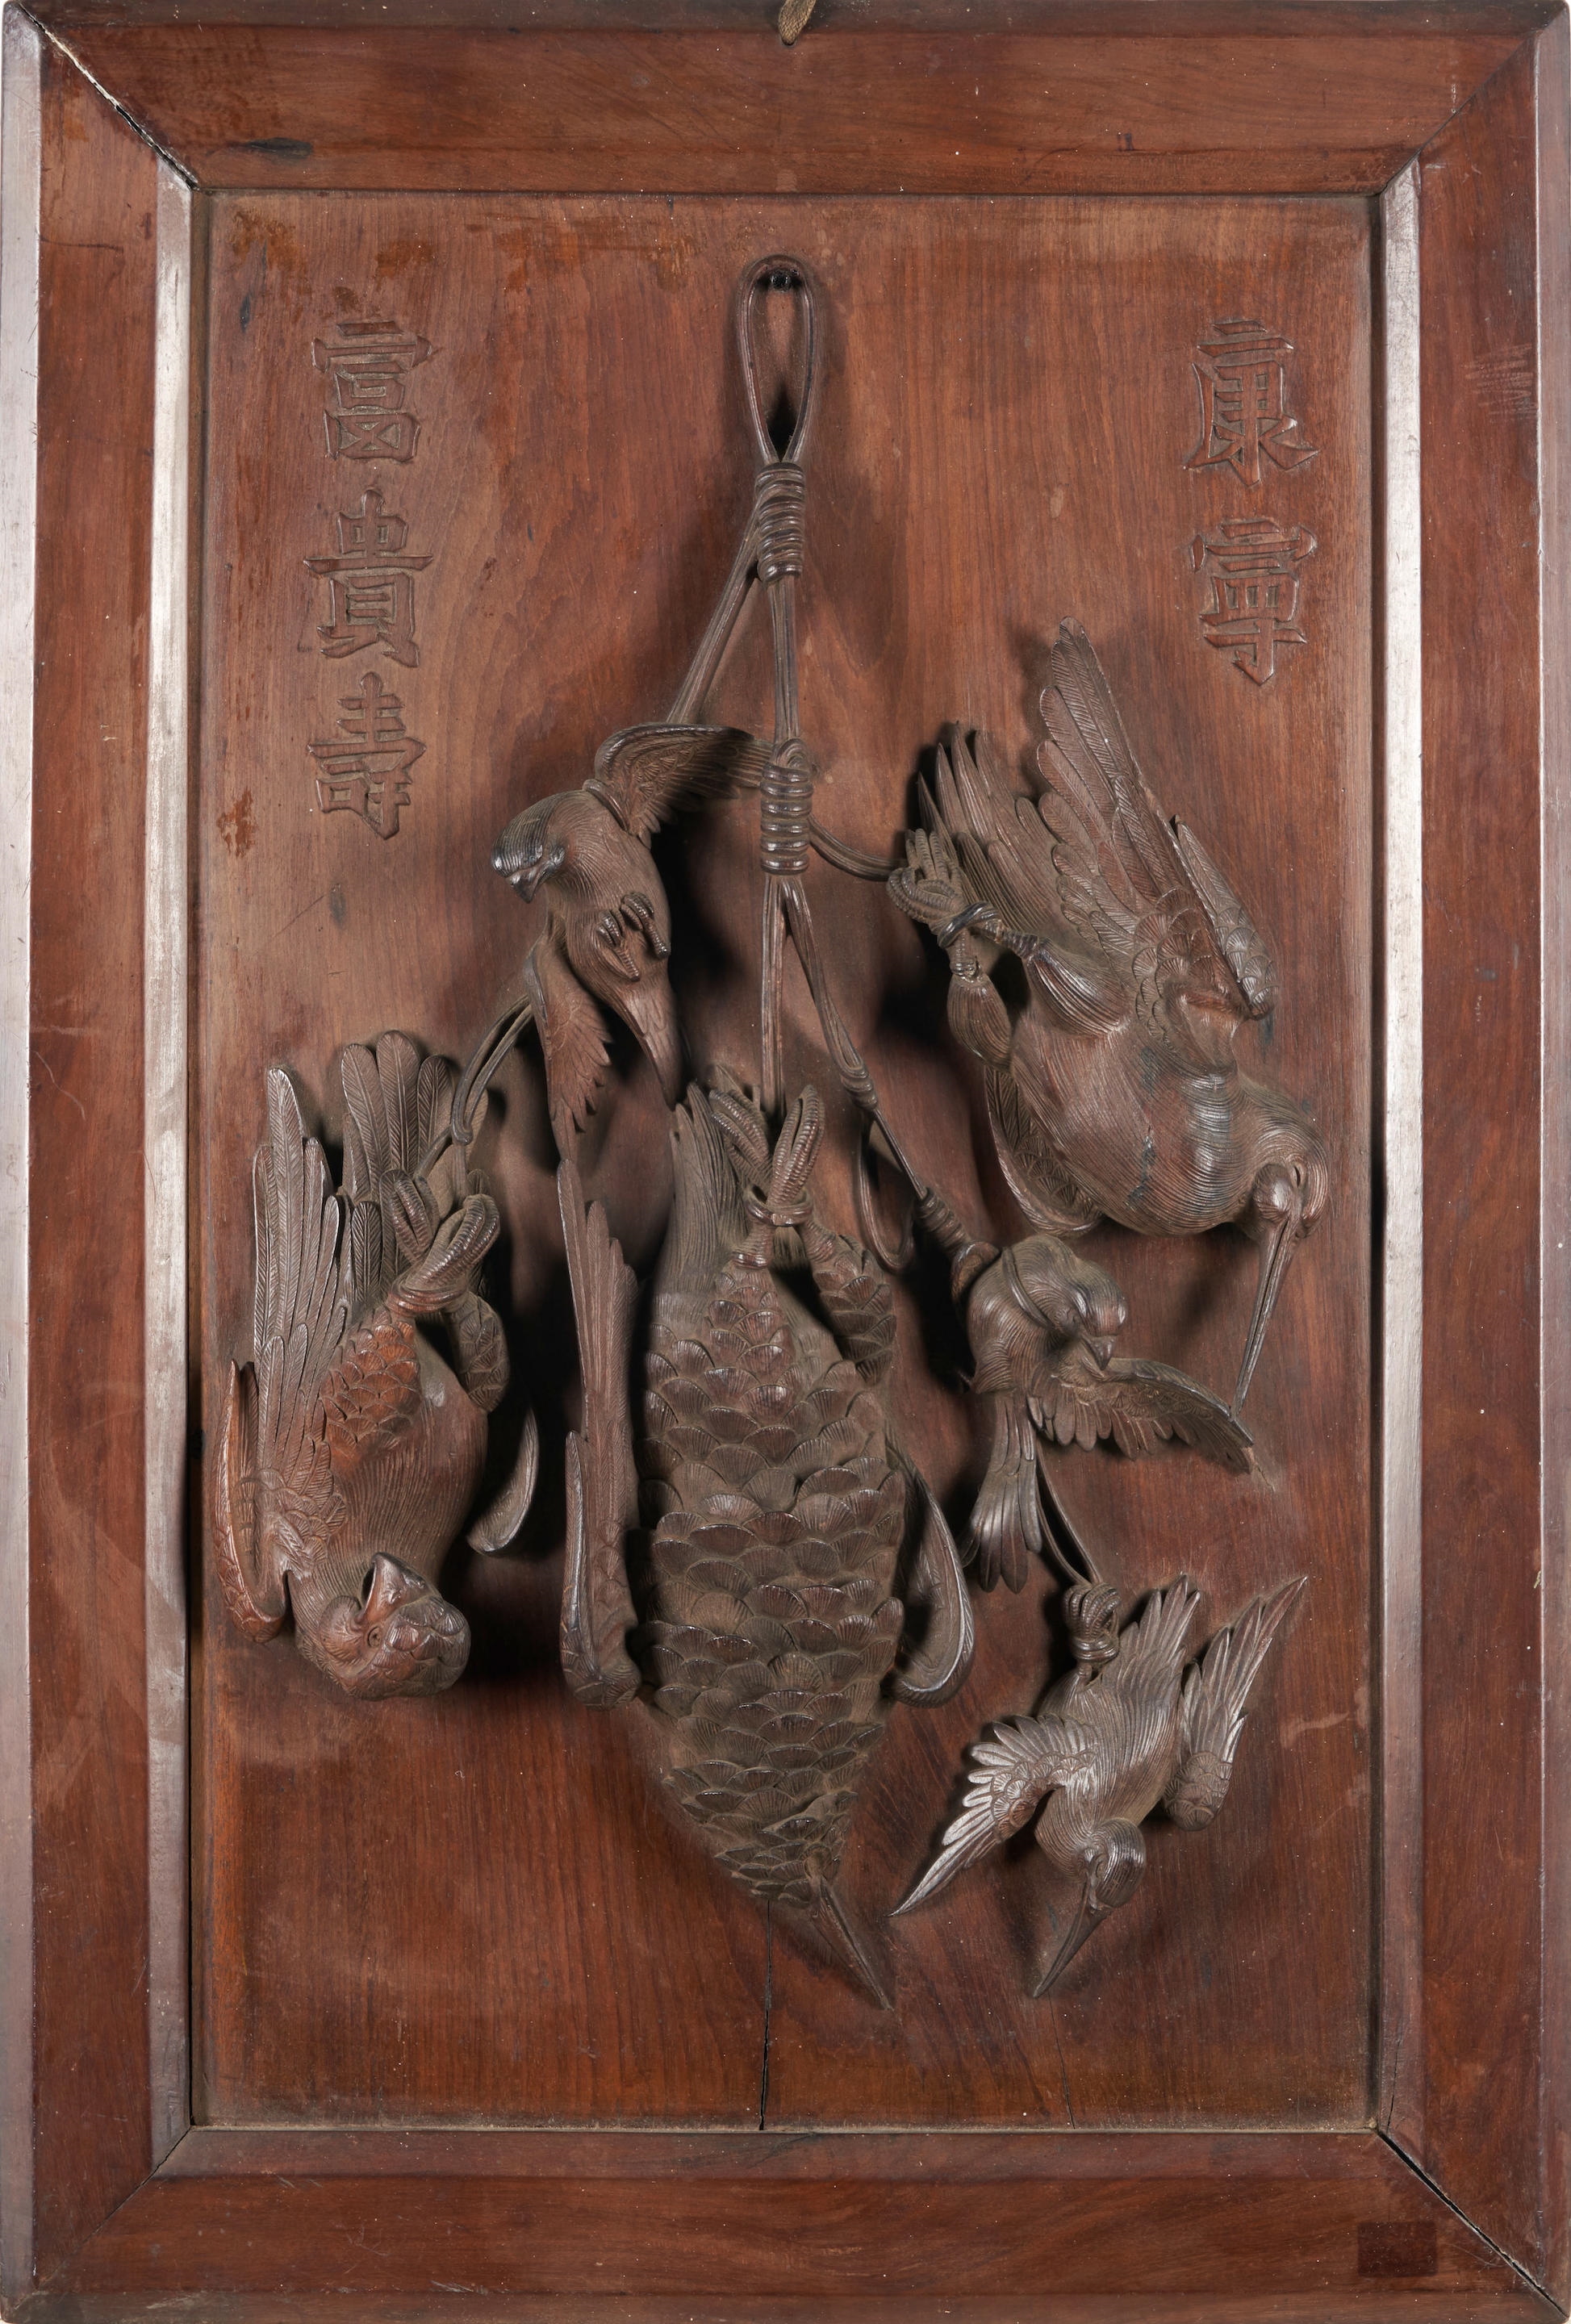 School of Wood Carving, Carving Wood Wall Art